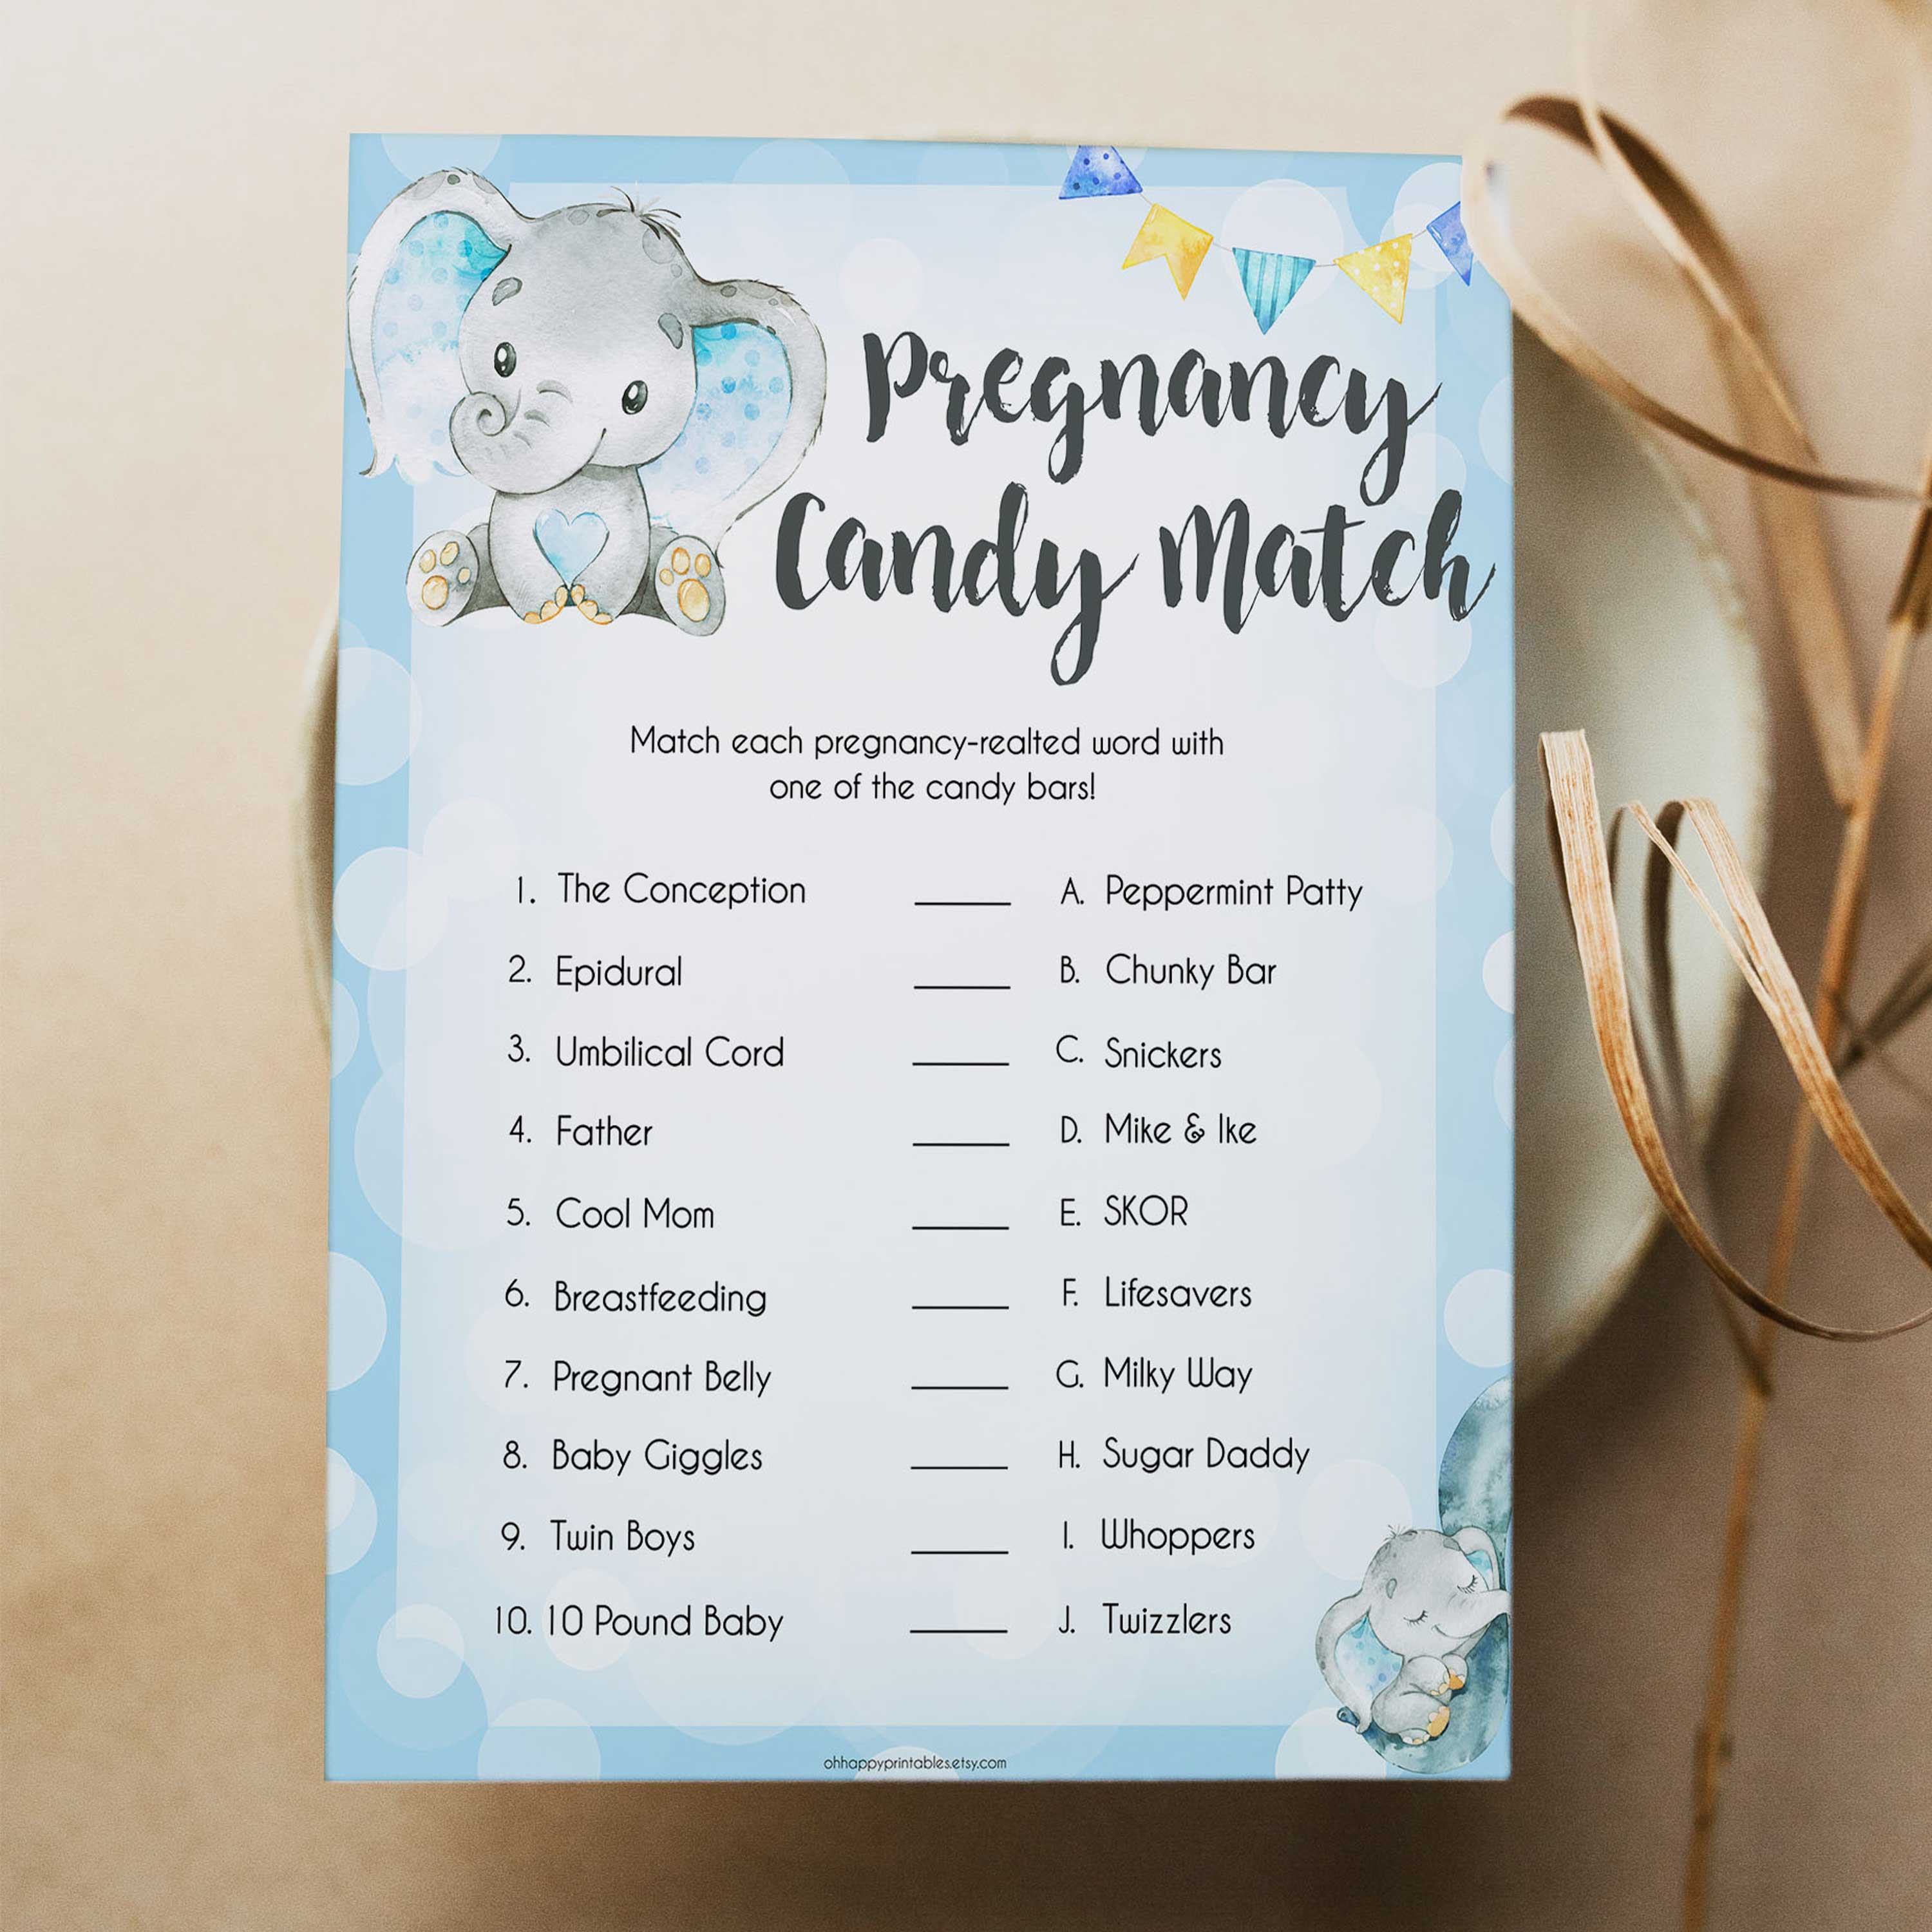 Blue elephant baby games, pregnancy candy match, elephant baby games, printable baby games, top baby games, best baby shower games, baby shower ideas, fun baby games, elephant baby shower